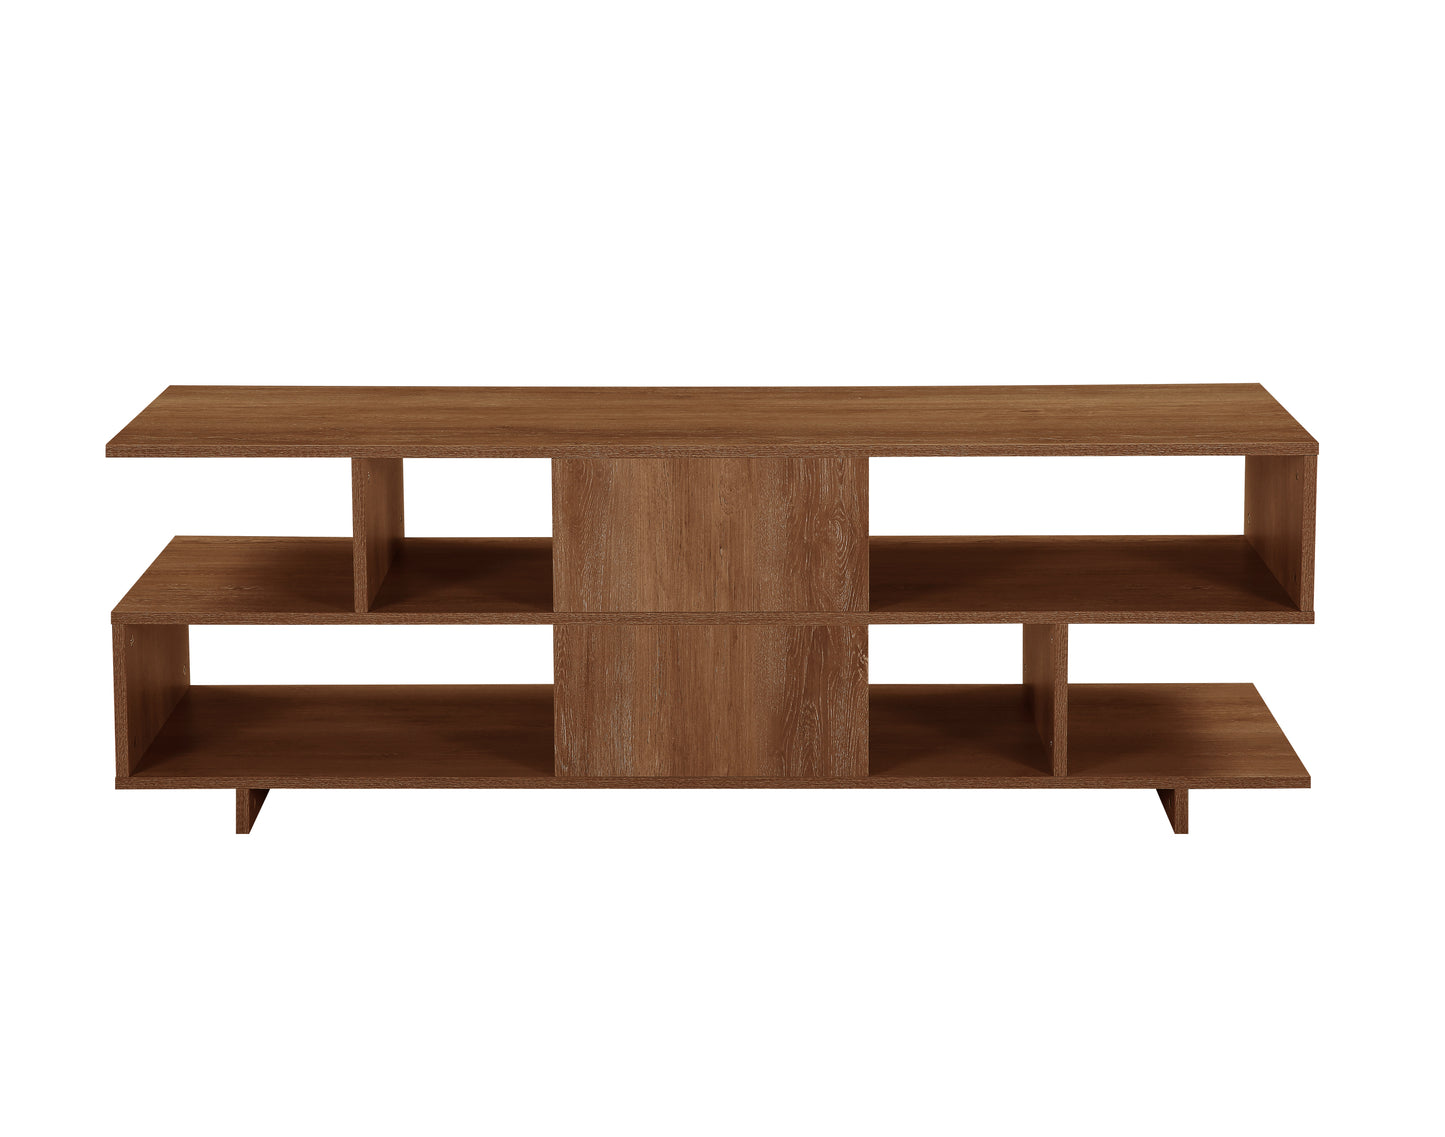 ACME Abhay TV Stand in Walnut Finish LV00793